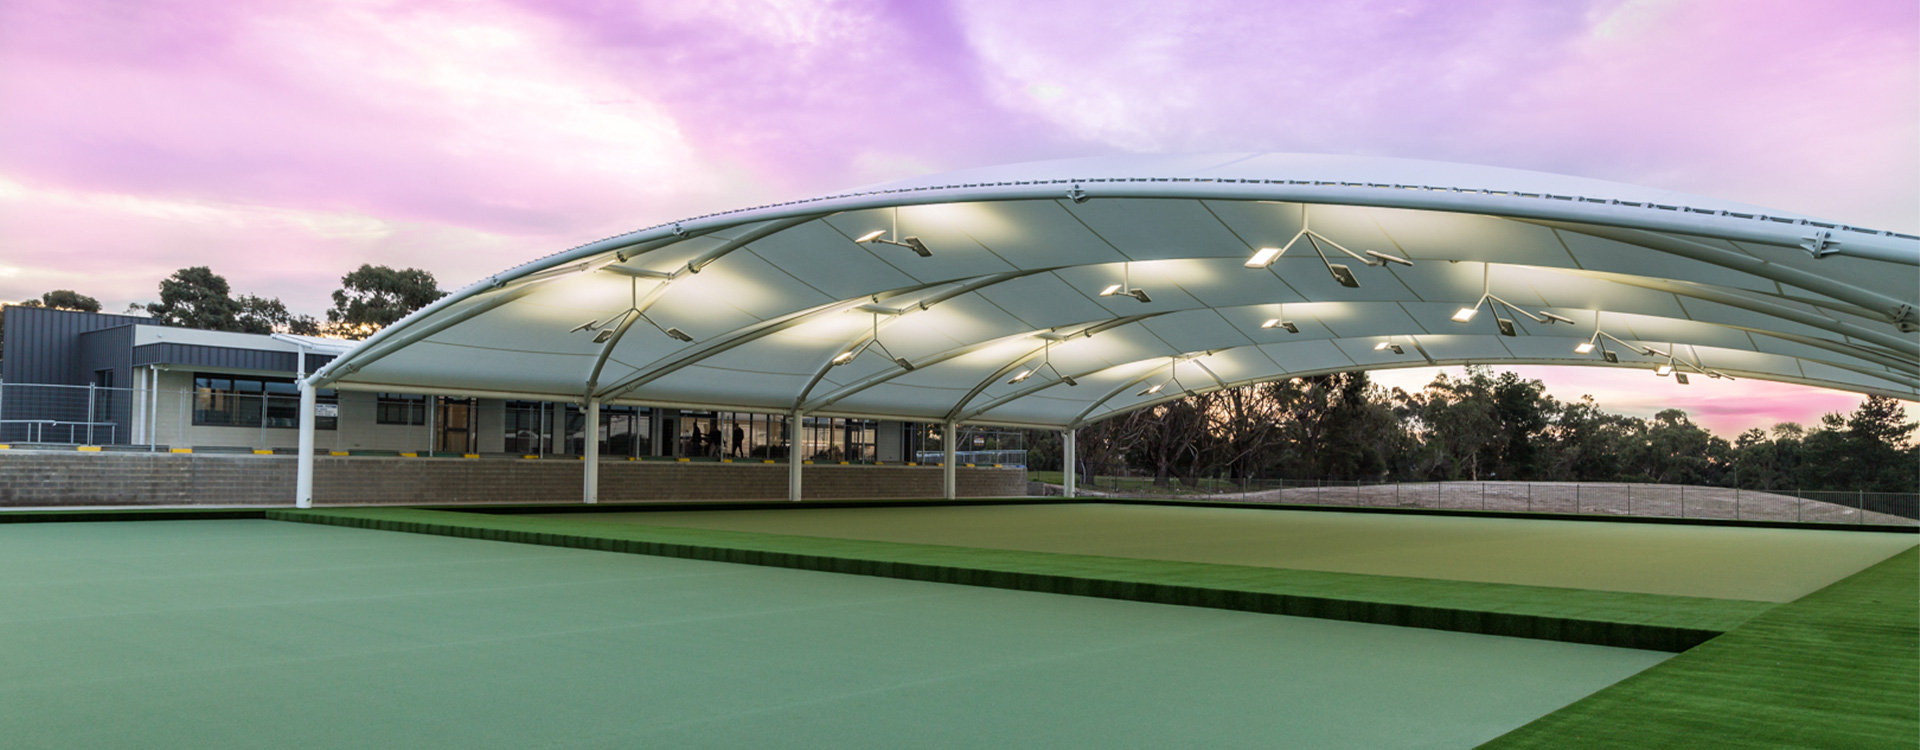 City of Geelong Bowls Club Canopy